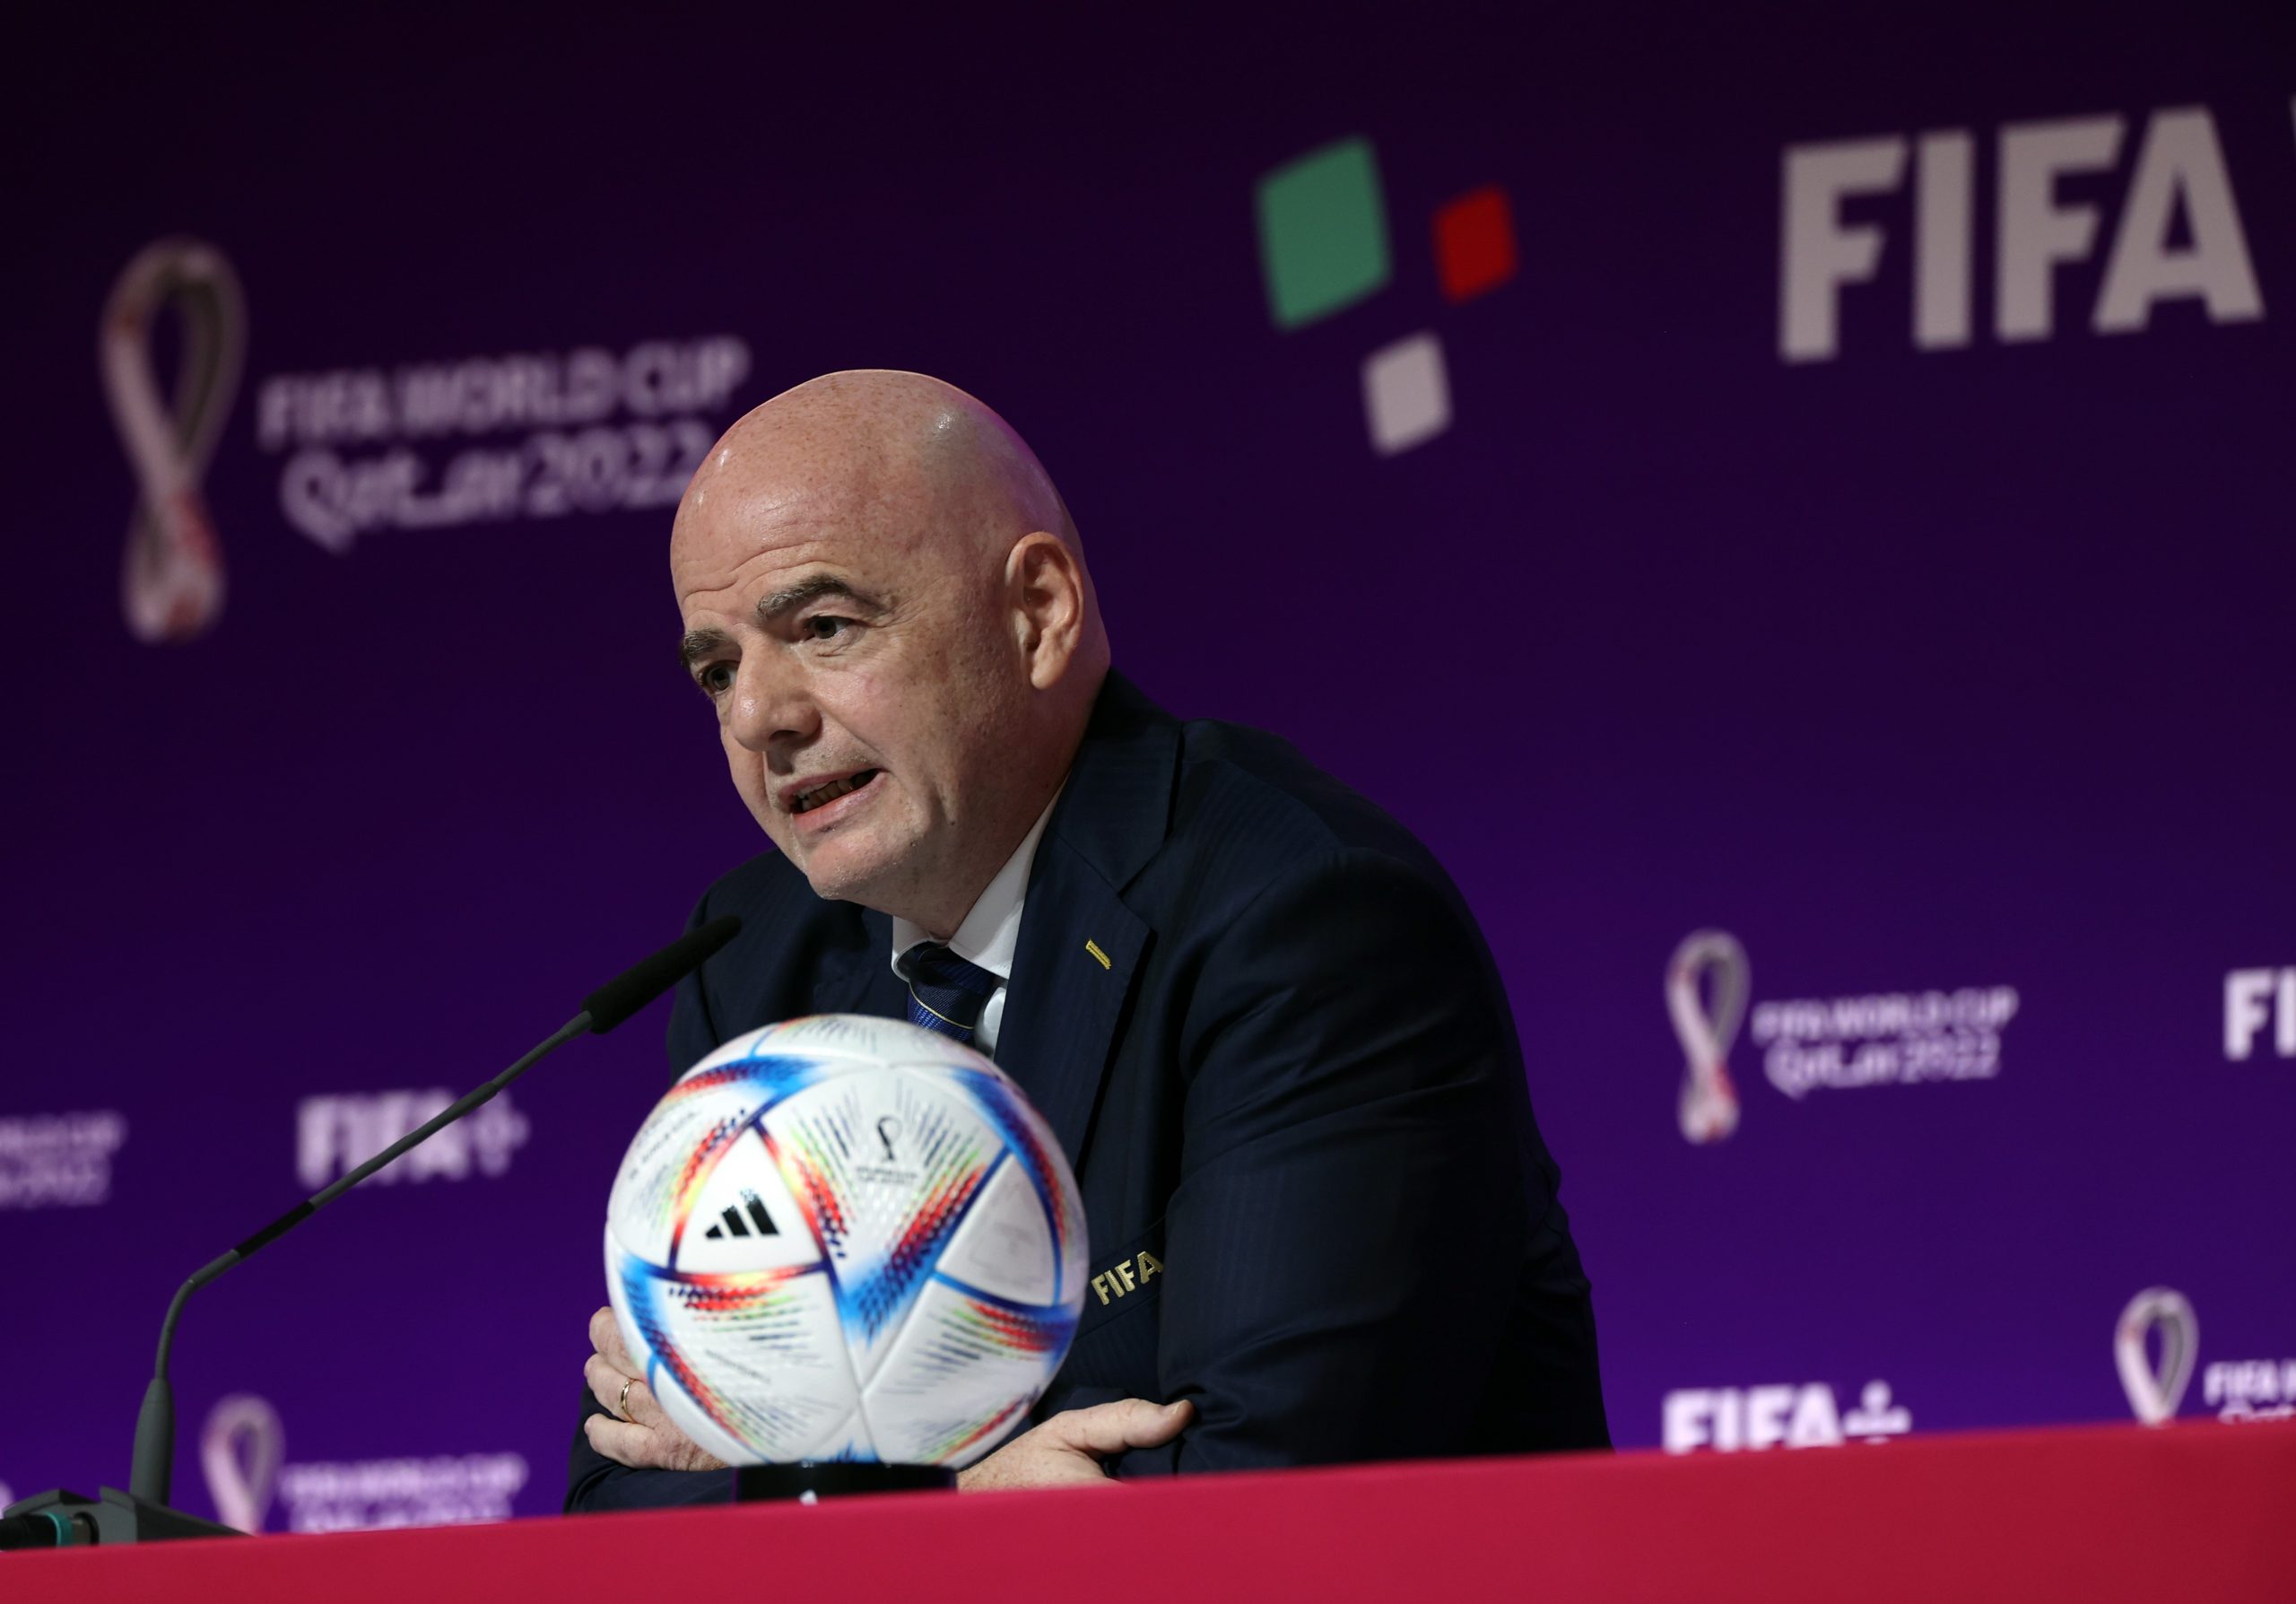 epa10313975 FIFA President Gianni Infantino addresses a press conference in Doha, Qatar, 19 November 2022. The FIFA World Cup Qatar 2022 will take place from 20 November to 18 December 2022.  EPA/MOAHAMED MESSARA